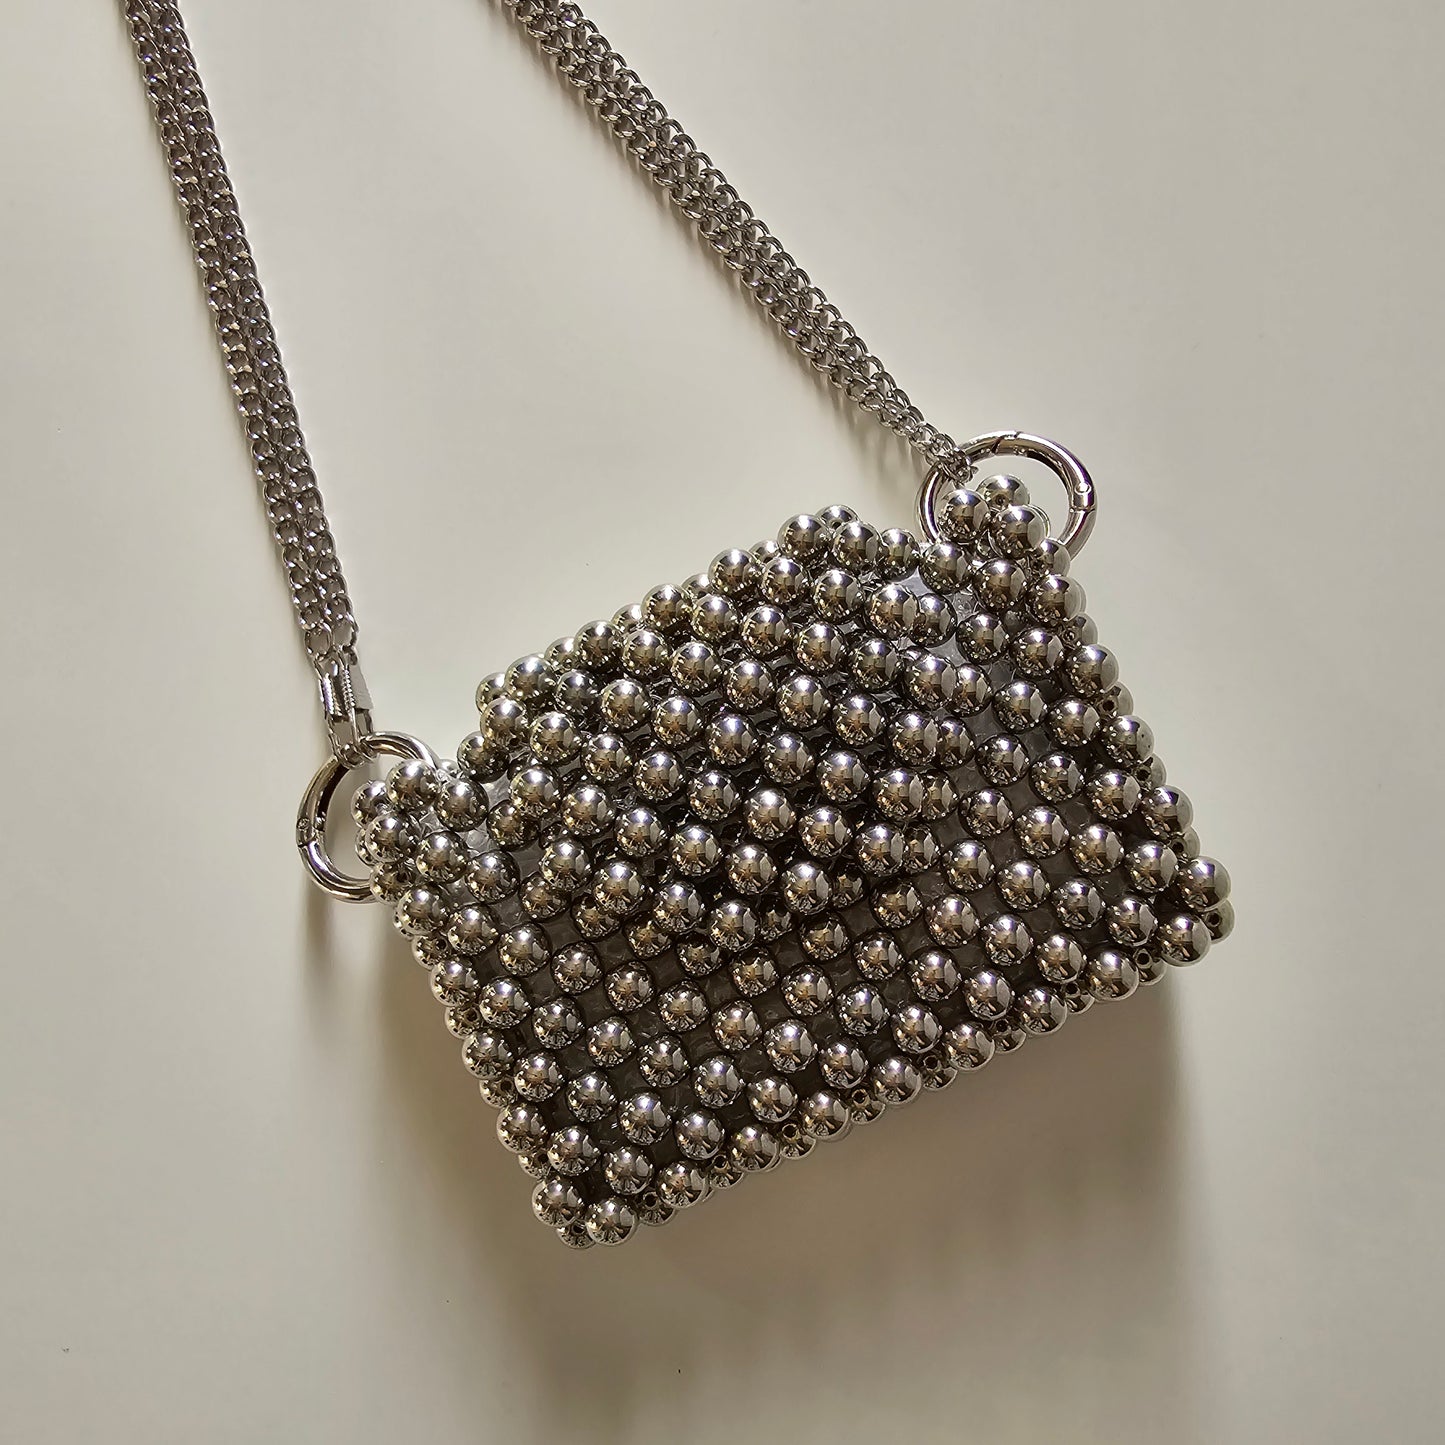 Mini Silver Beaded Bag (Limited Edition)